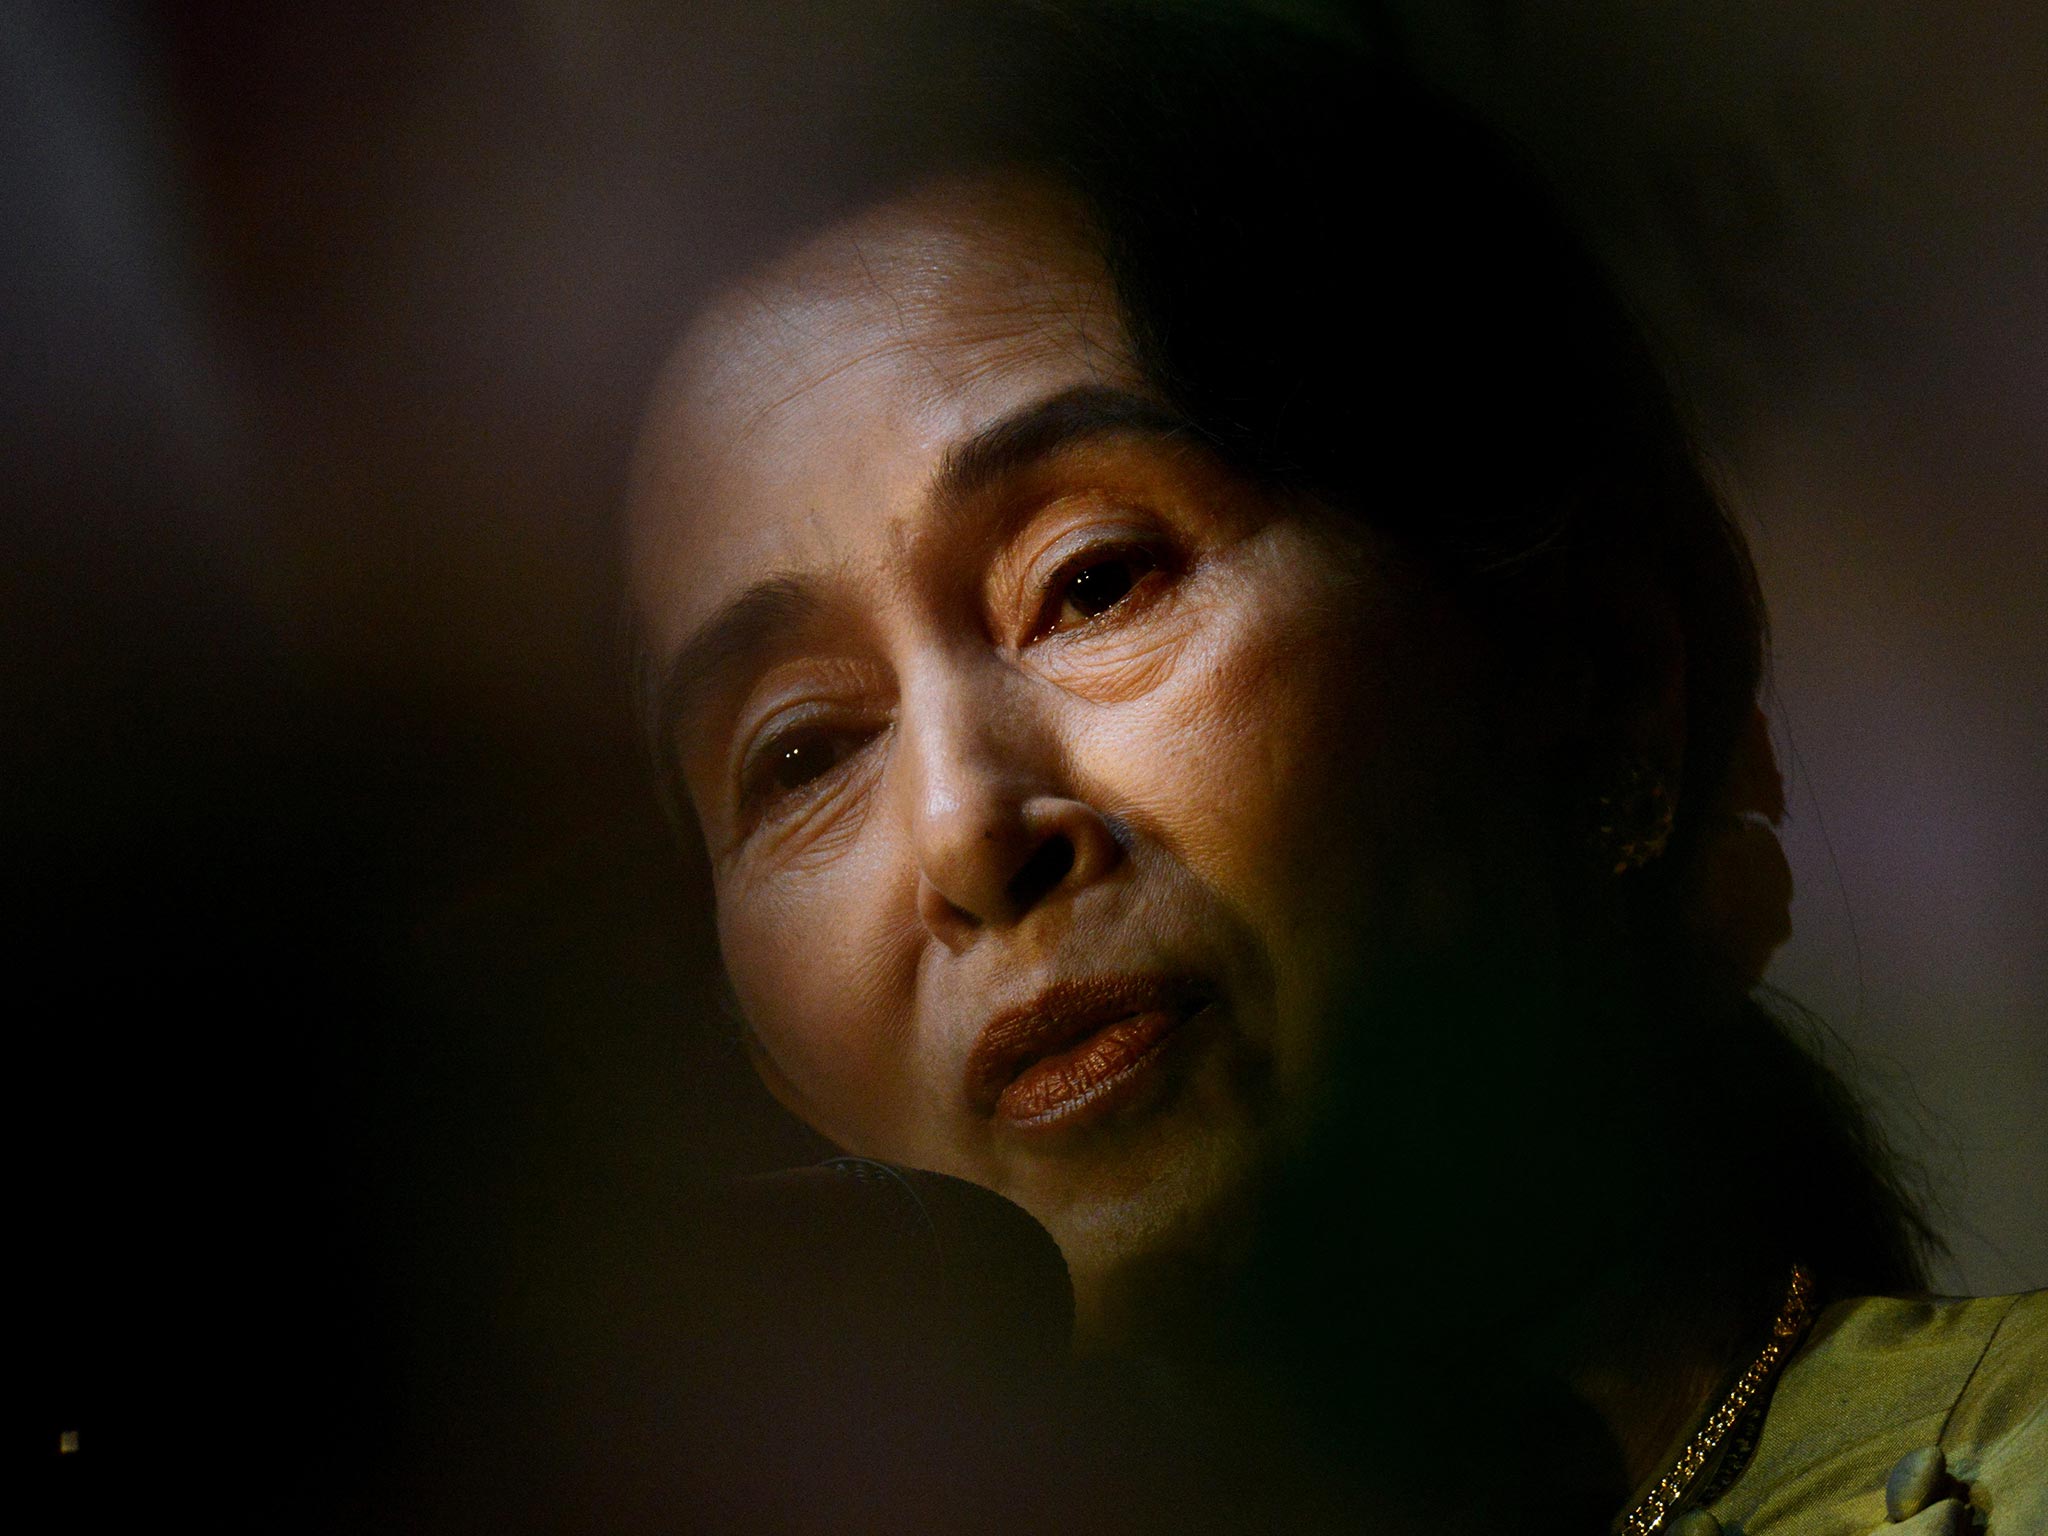 Aung San Suu Kyi has come under intense criticism for her ignorance of the violence towards Rohingya Muslims in Myanmar